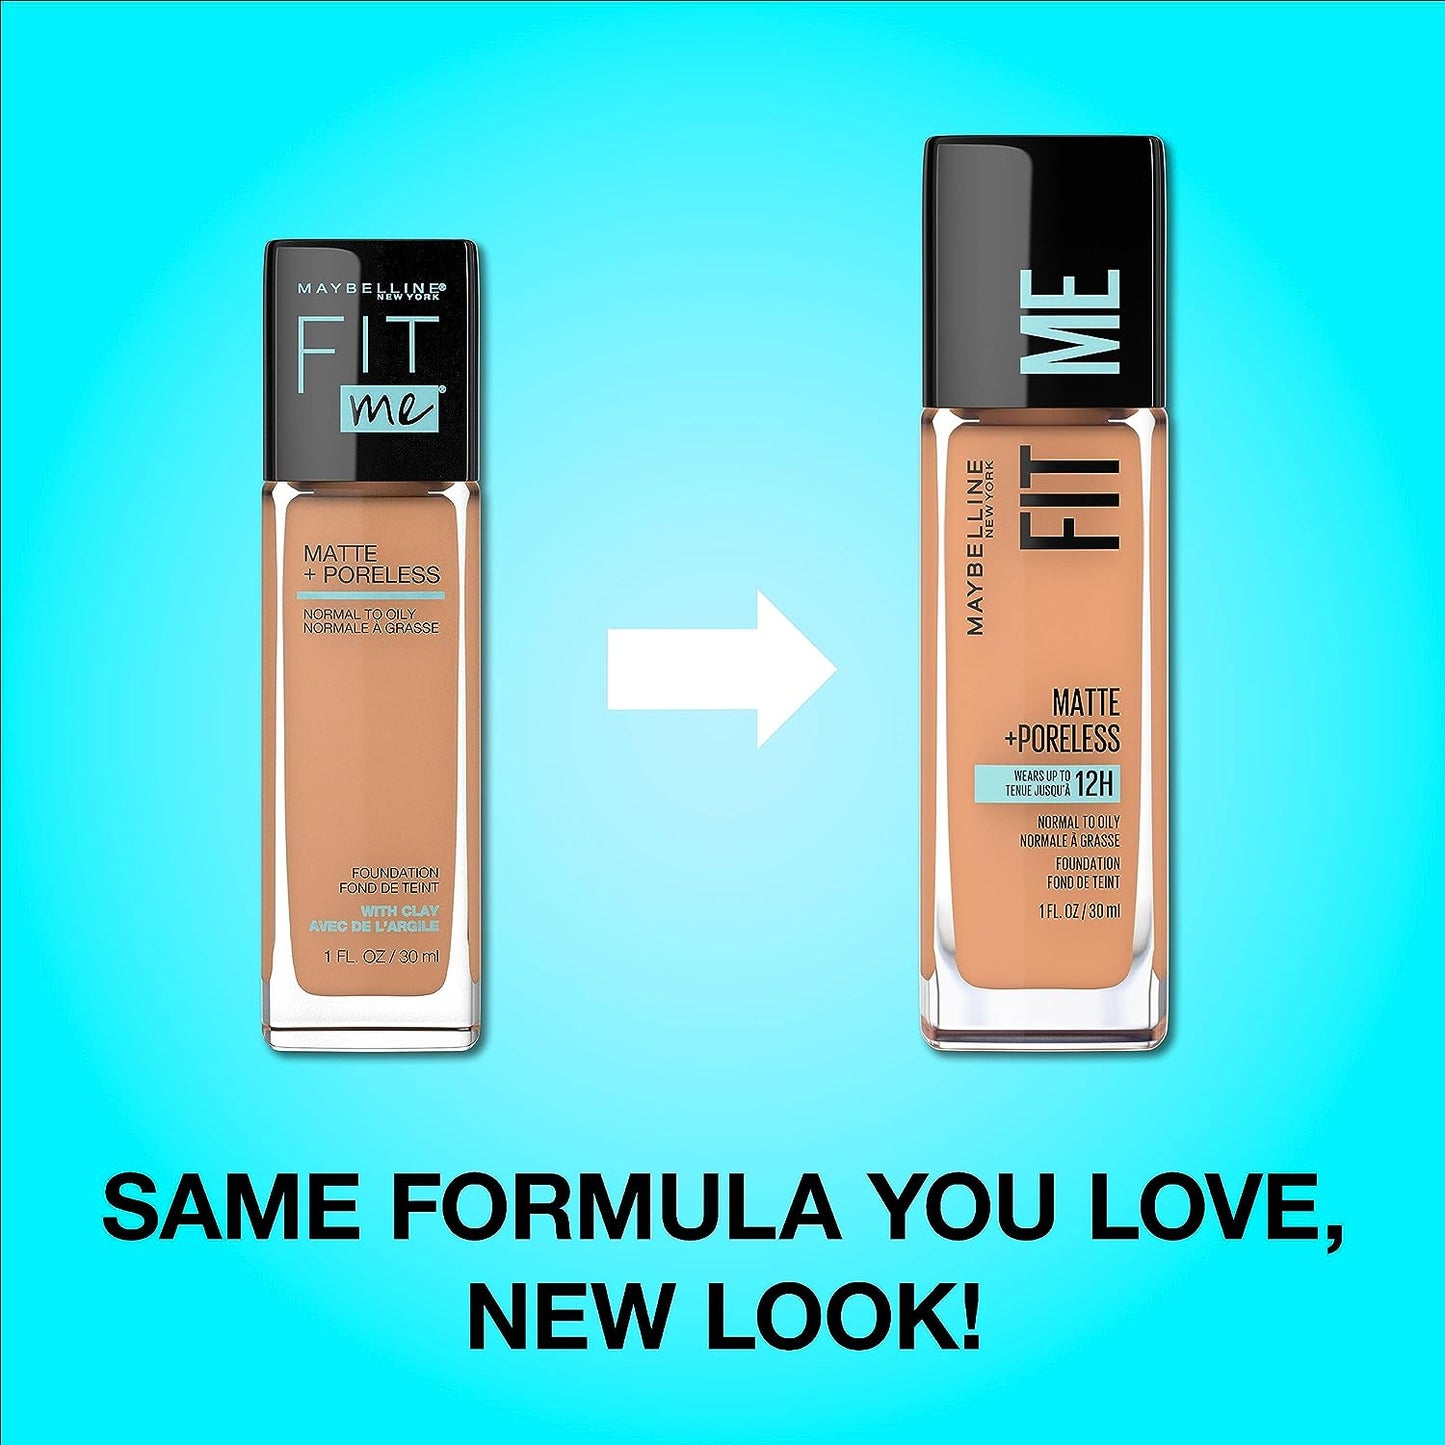 Maybelline Fit Me Matte + Poreless Liquid Oil-Free Foundation Makeup, Coconut, 1 Count (Packaging May Vary)